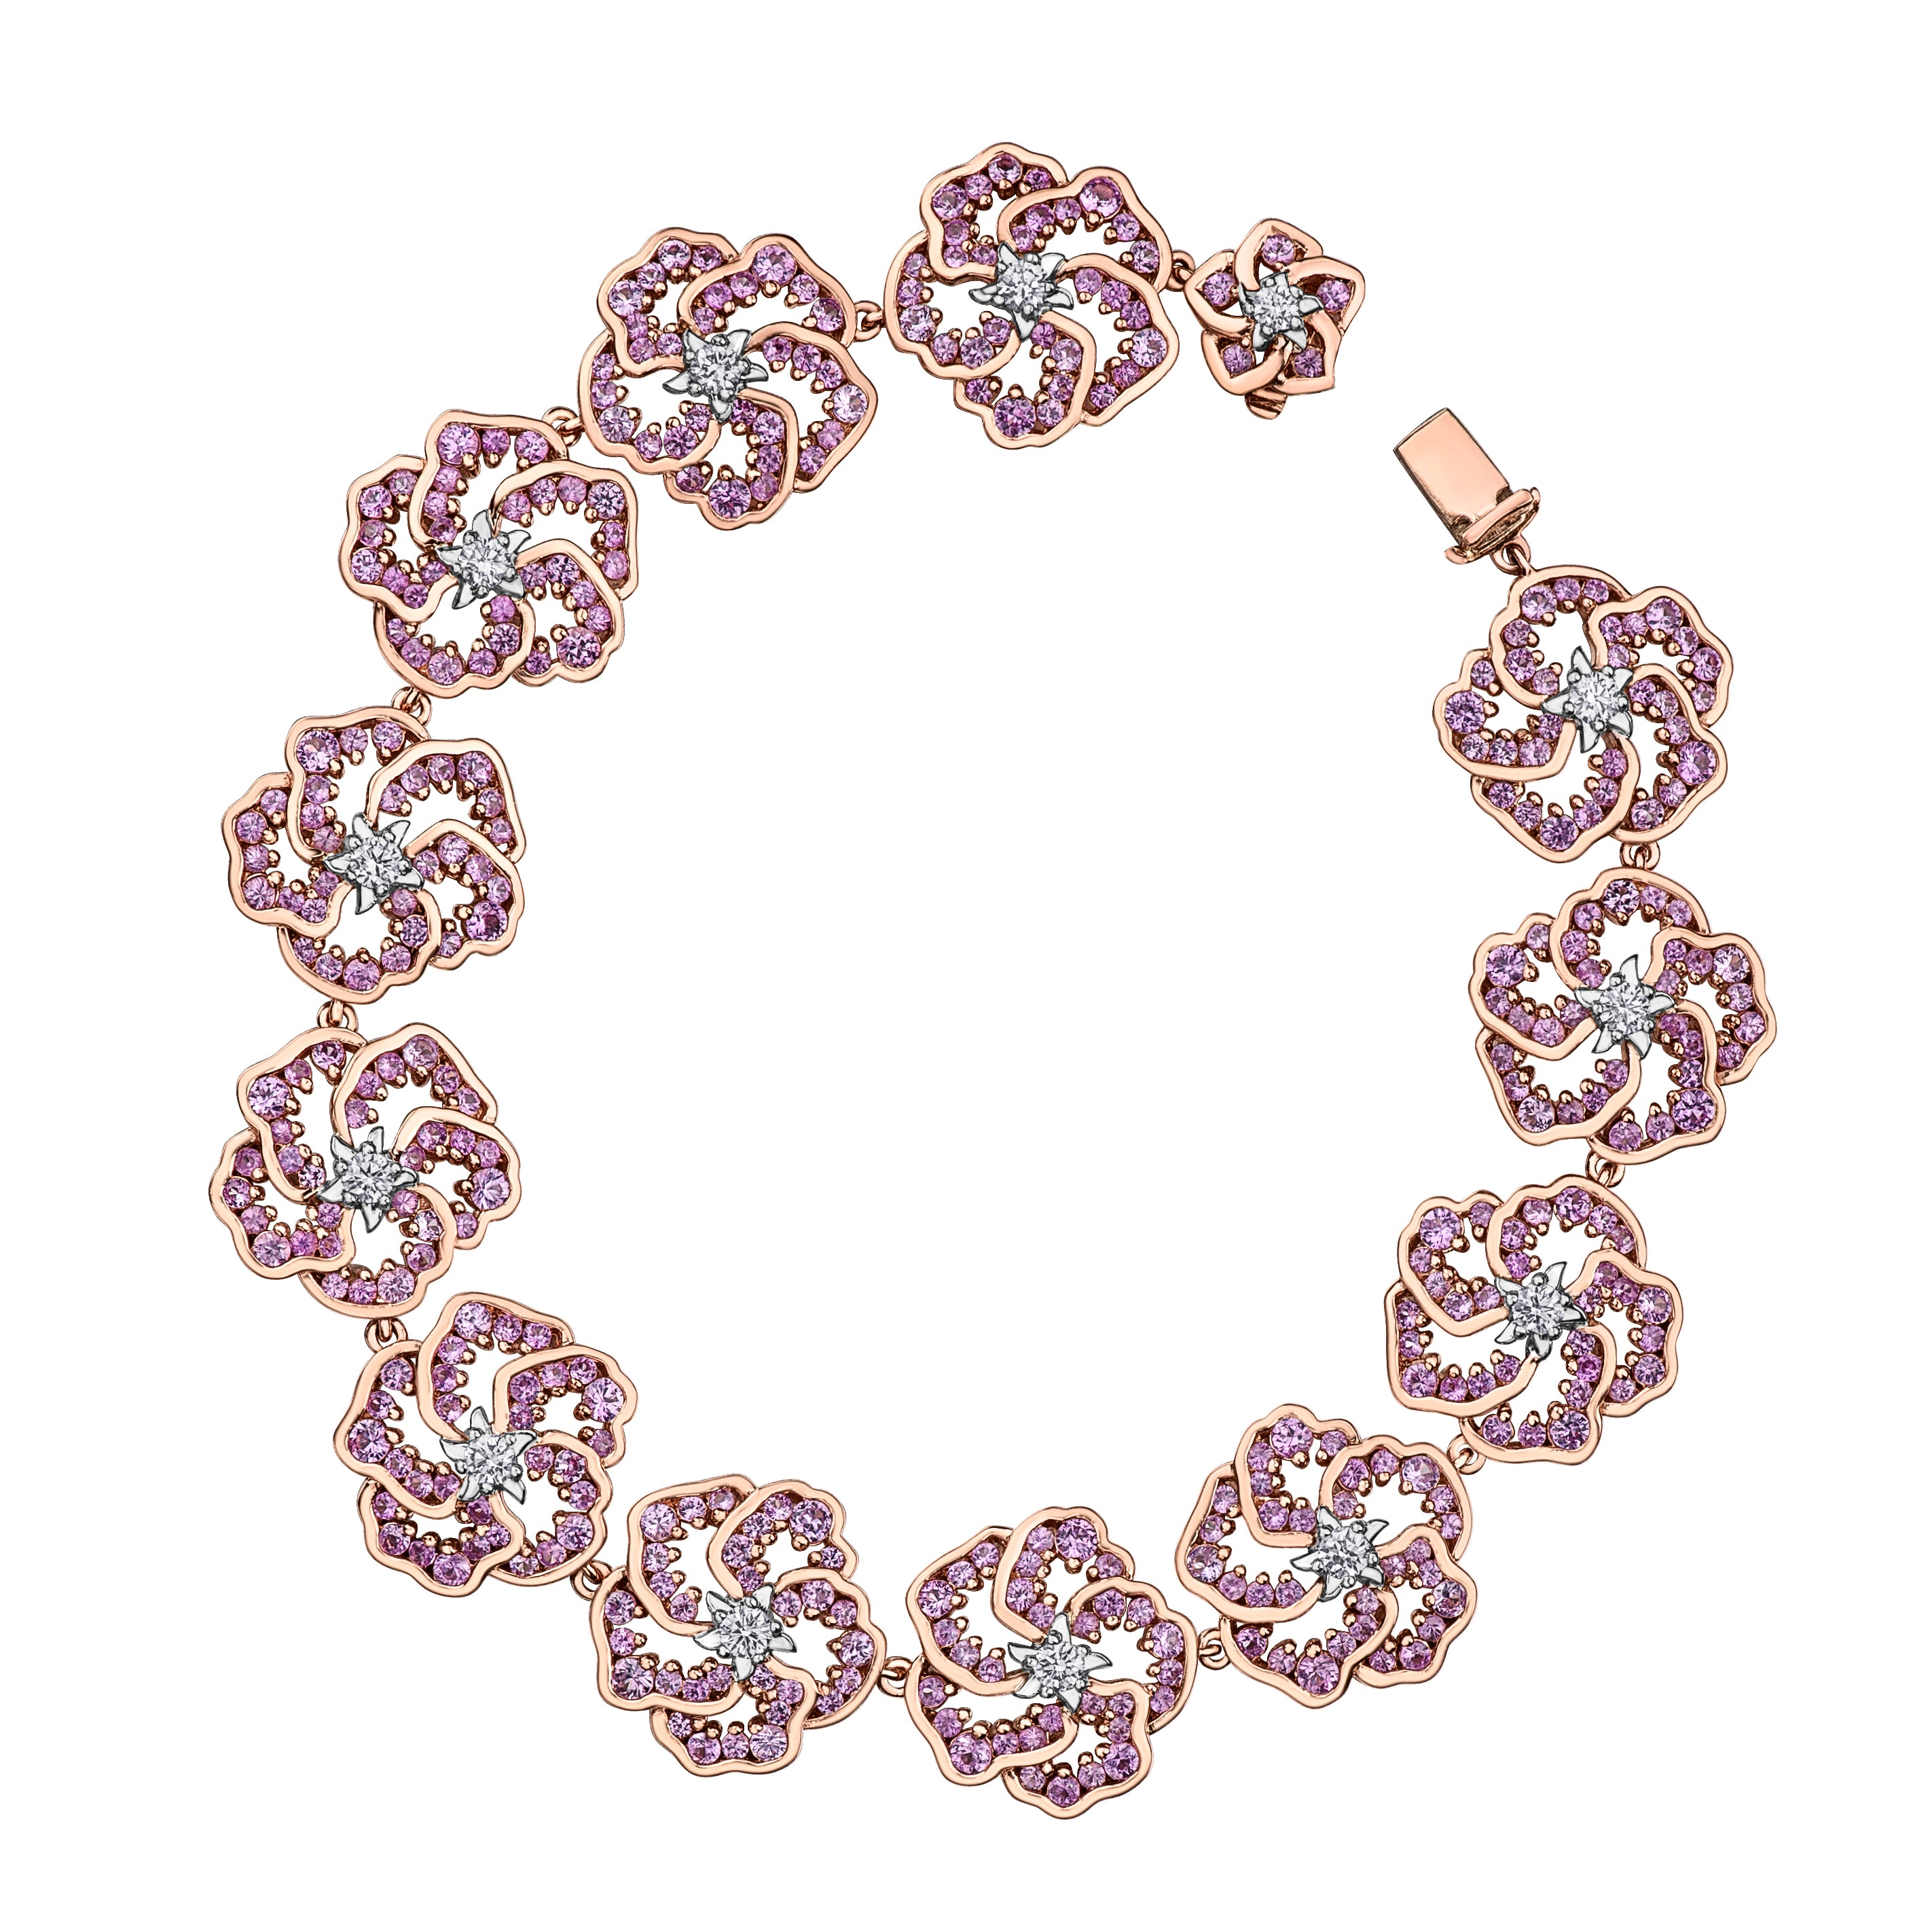 Crafted in 14KT white and rose Certified Canadian Gold, this bracelet features wildflowers set with round brilliant-cut Canadian diamonds, amethyst and pink sapphires.